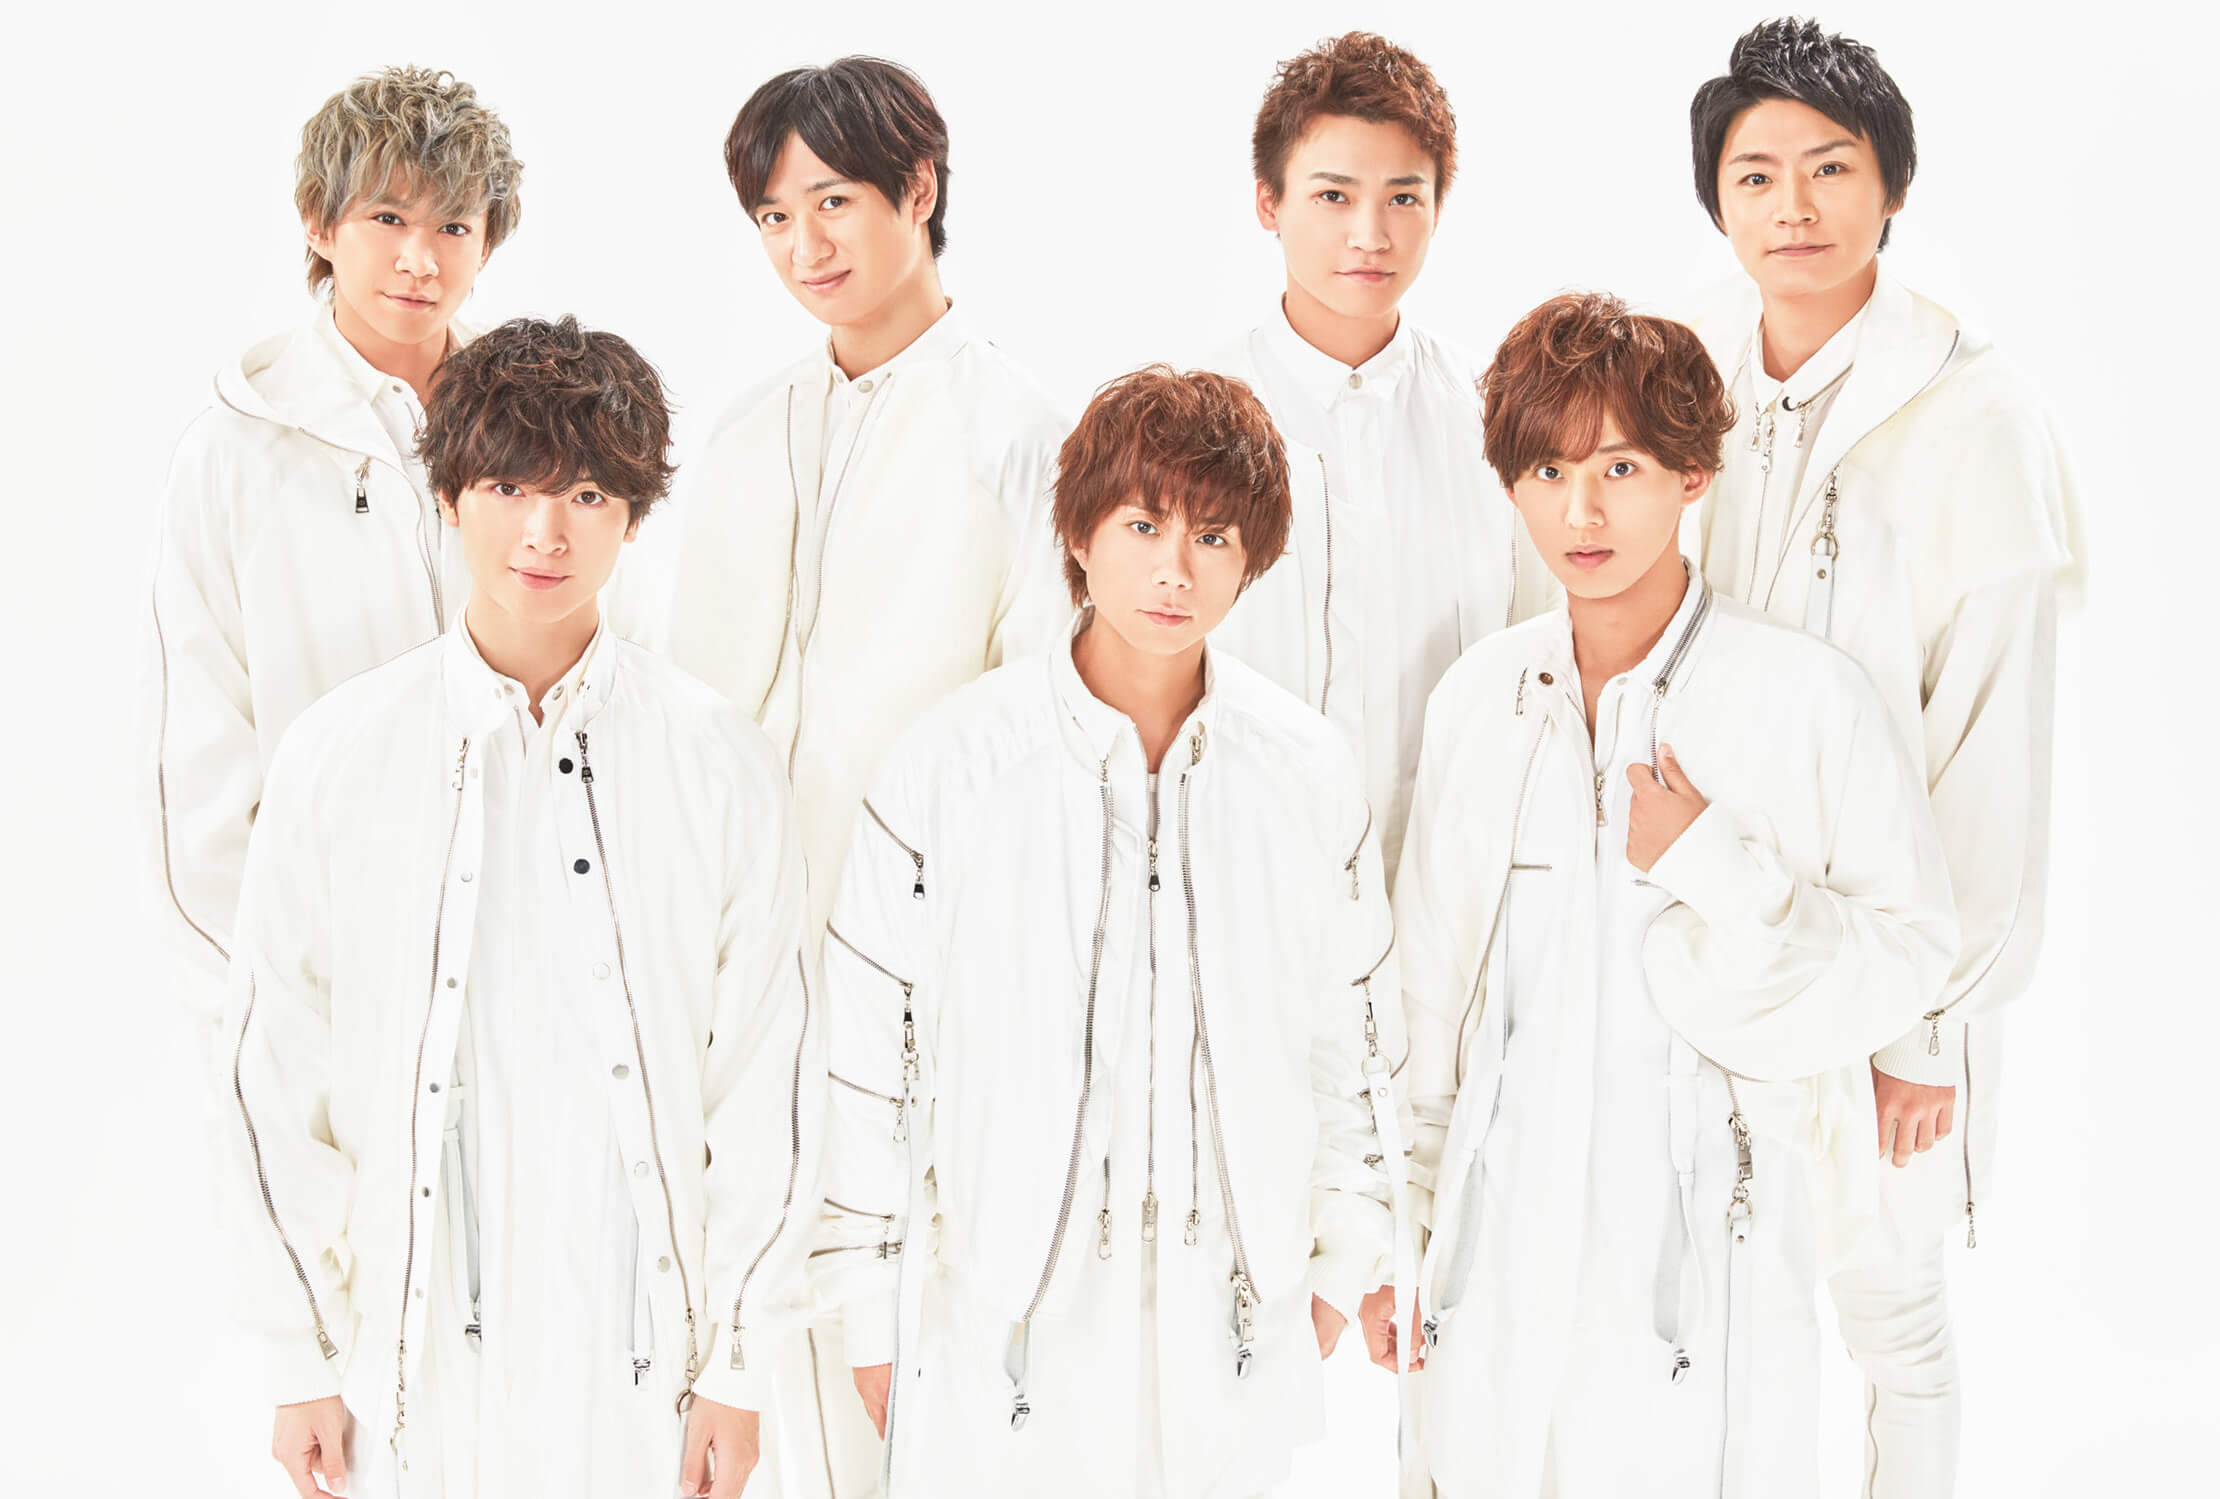 Kis-My-Ft2 Show Off Their Shuffle Dance Skills in Music Video for